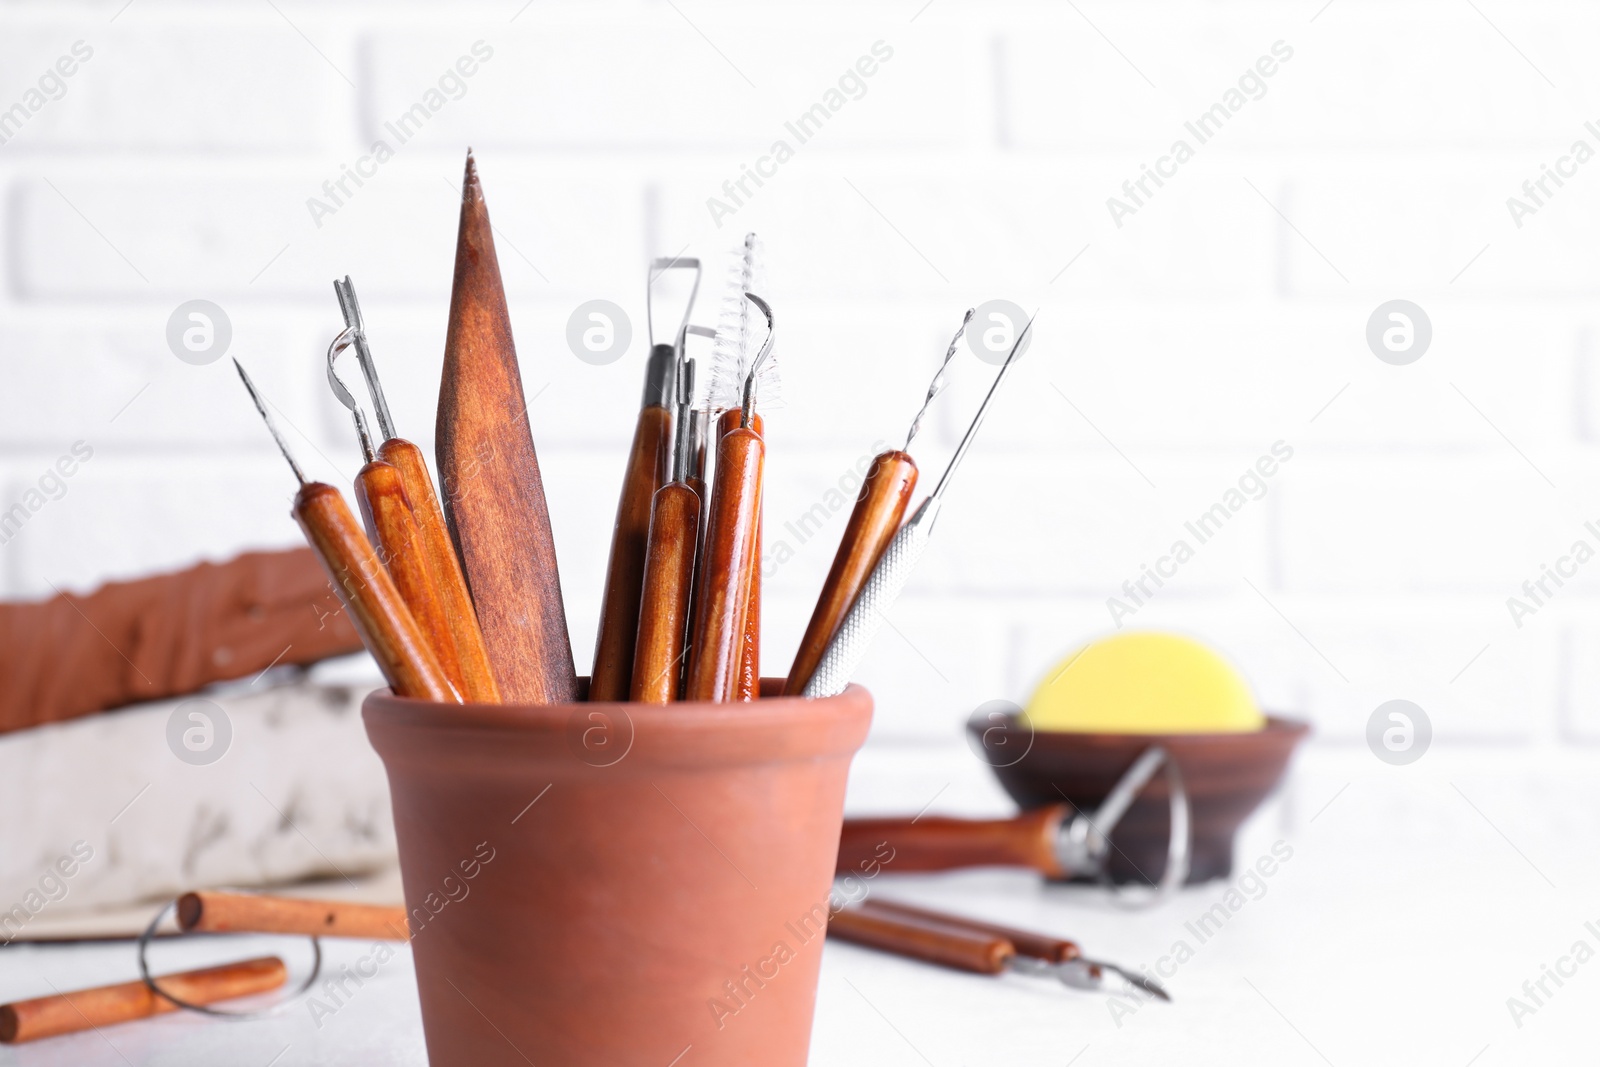 Photo of Clay and set of crafting tools on white table against brick wall, closeup